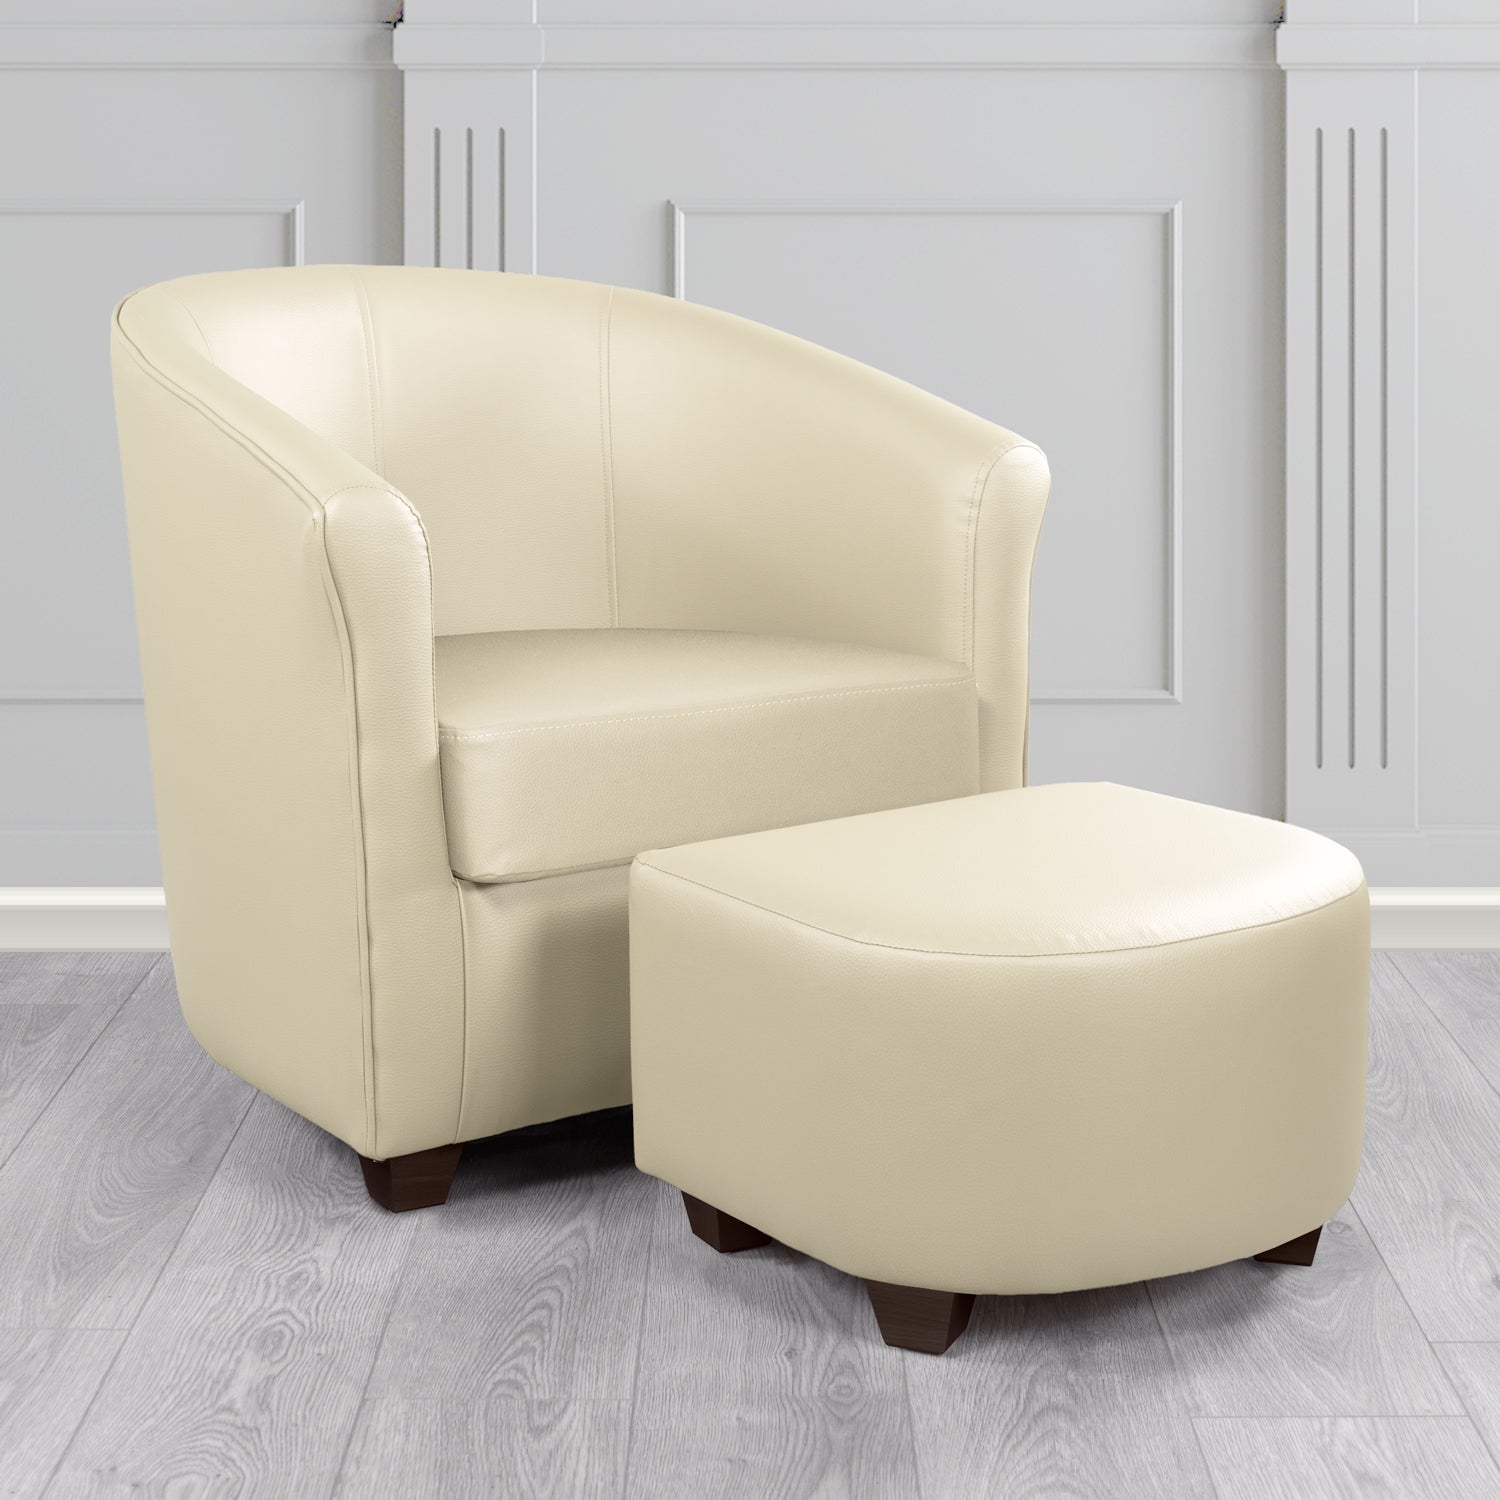 Cannes Tub Chair with Footstool Set in Madrid Cream Faux Leather - The Tub Chair Shop